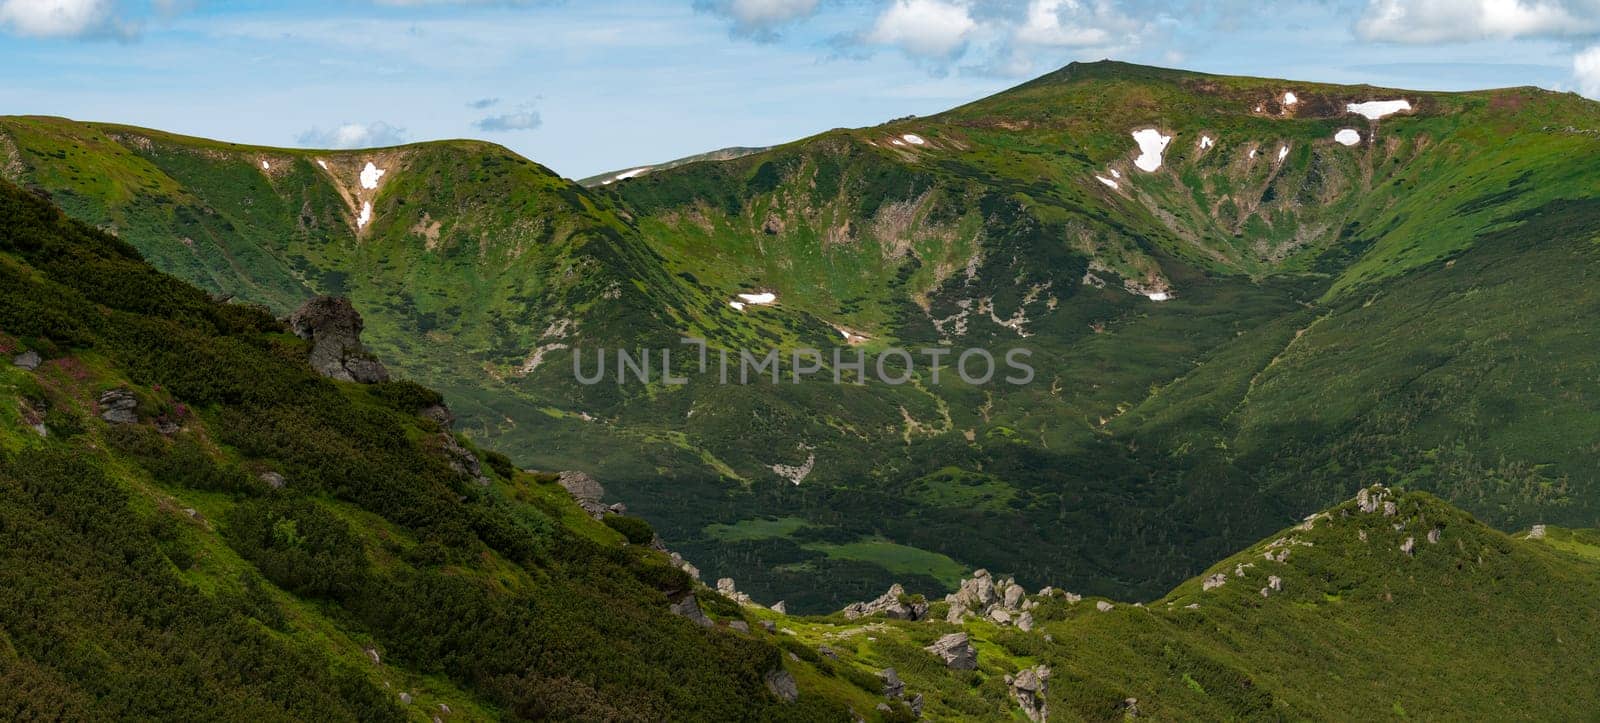 Mountain landscape, panoramic view of Mount Menchul in the Ukrainian Carpathians, summer in the Carpathian Mountains.